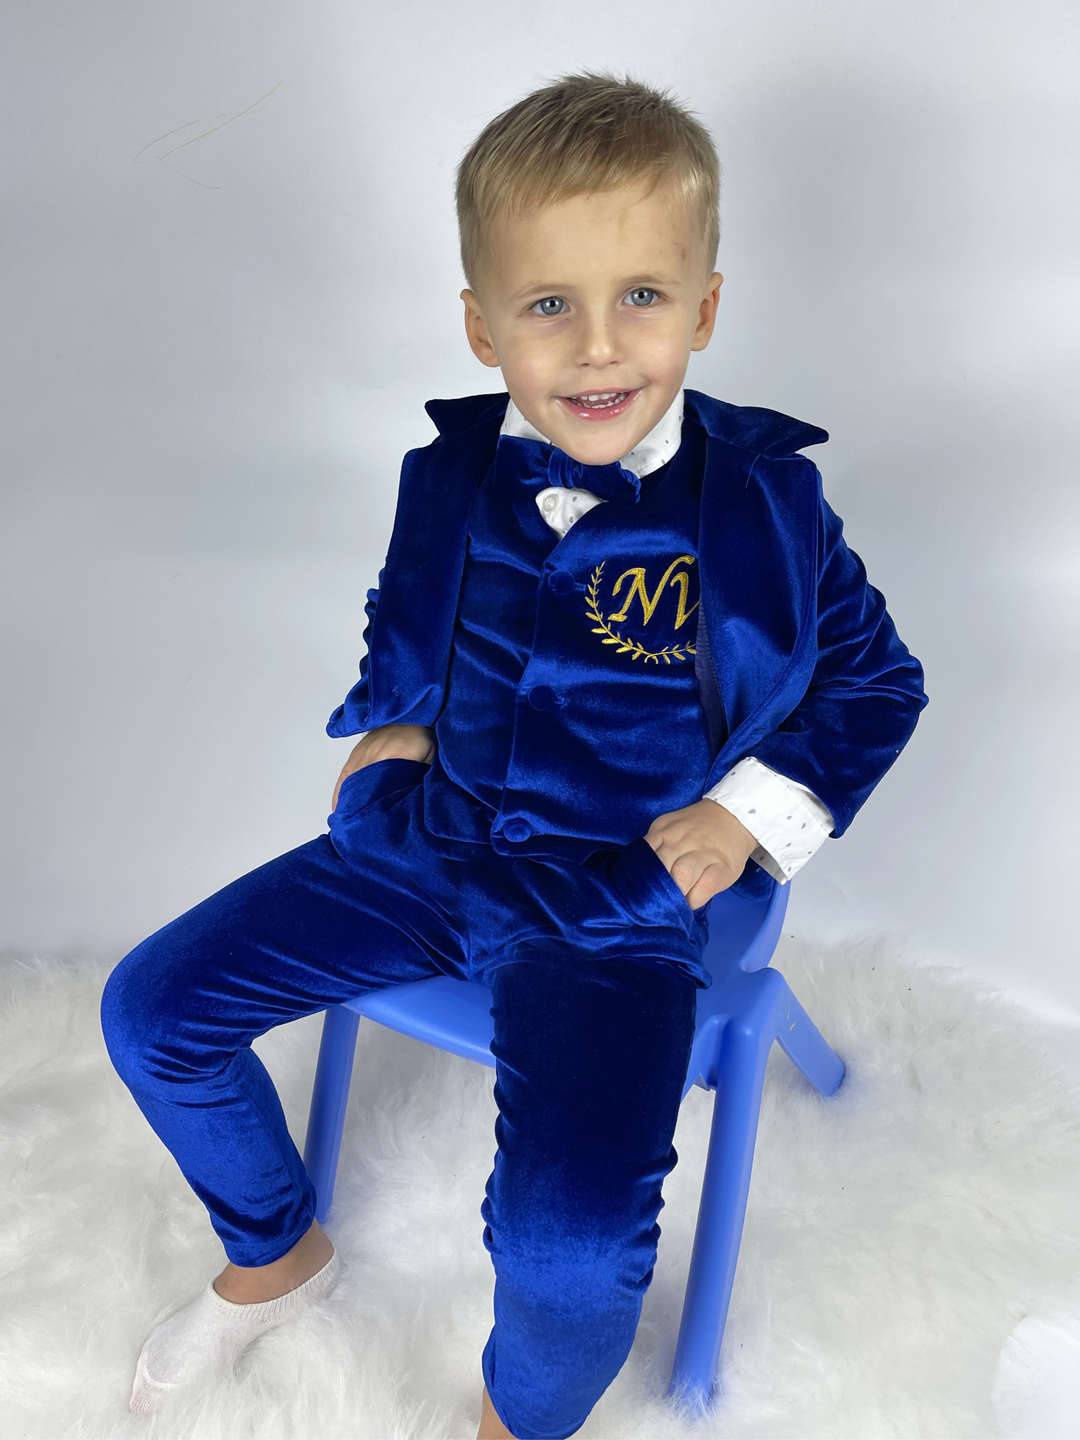 A cheerful 4-year-old boy, with bright blond hair, sits comfortably on a chair. He wears a stylish royal blue tuxedo, complete with a gold-embroidered vest showcasing his initials.